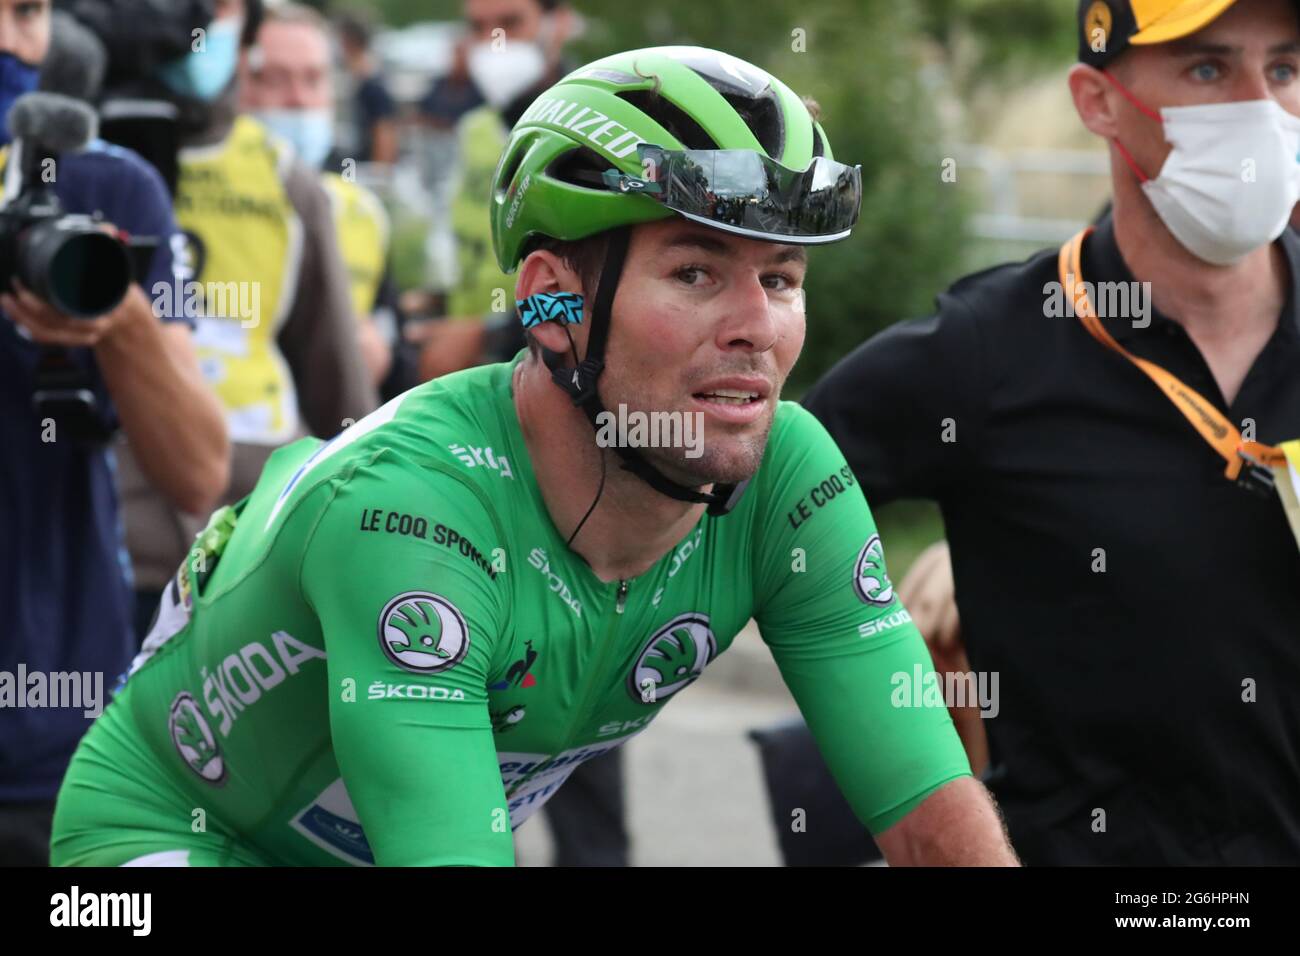 6th July 2021, Albertville, Auvergne-Rh&#xf4;ne-Alpes, France; TOUR DE  FRANCE 2021- UCI Cycling World Tour. Stage 10 from Albertville to Valence  on the 6th of July 2021, Valence, France. Mark Cavendish (GBR) DQT